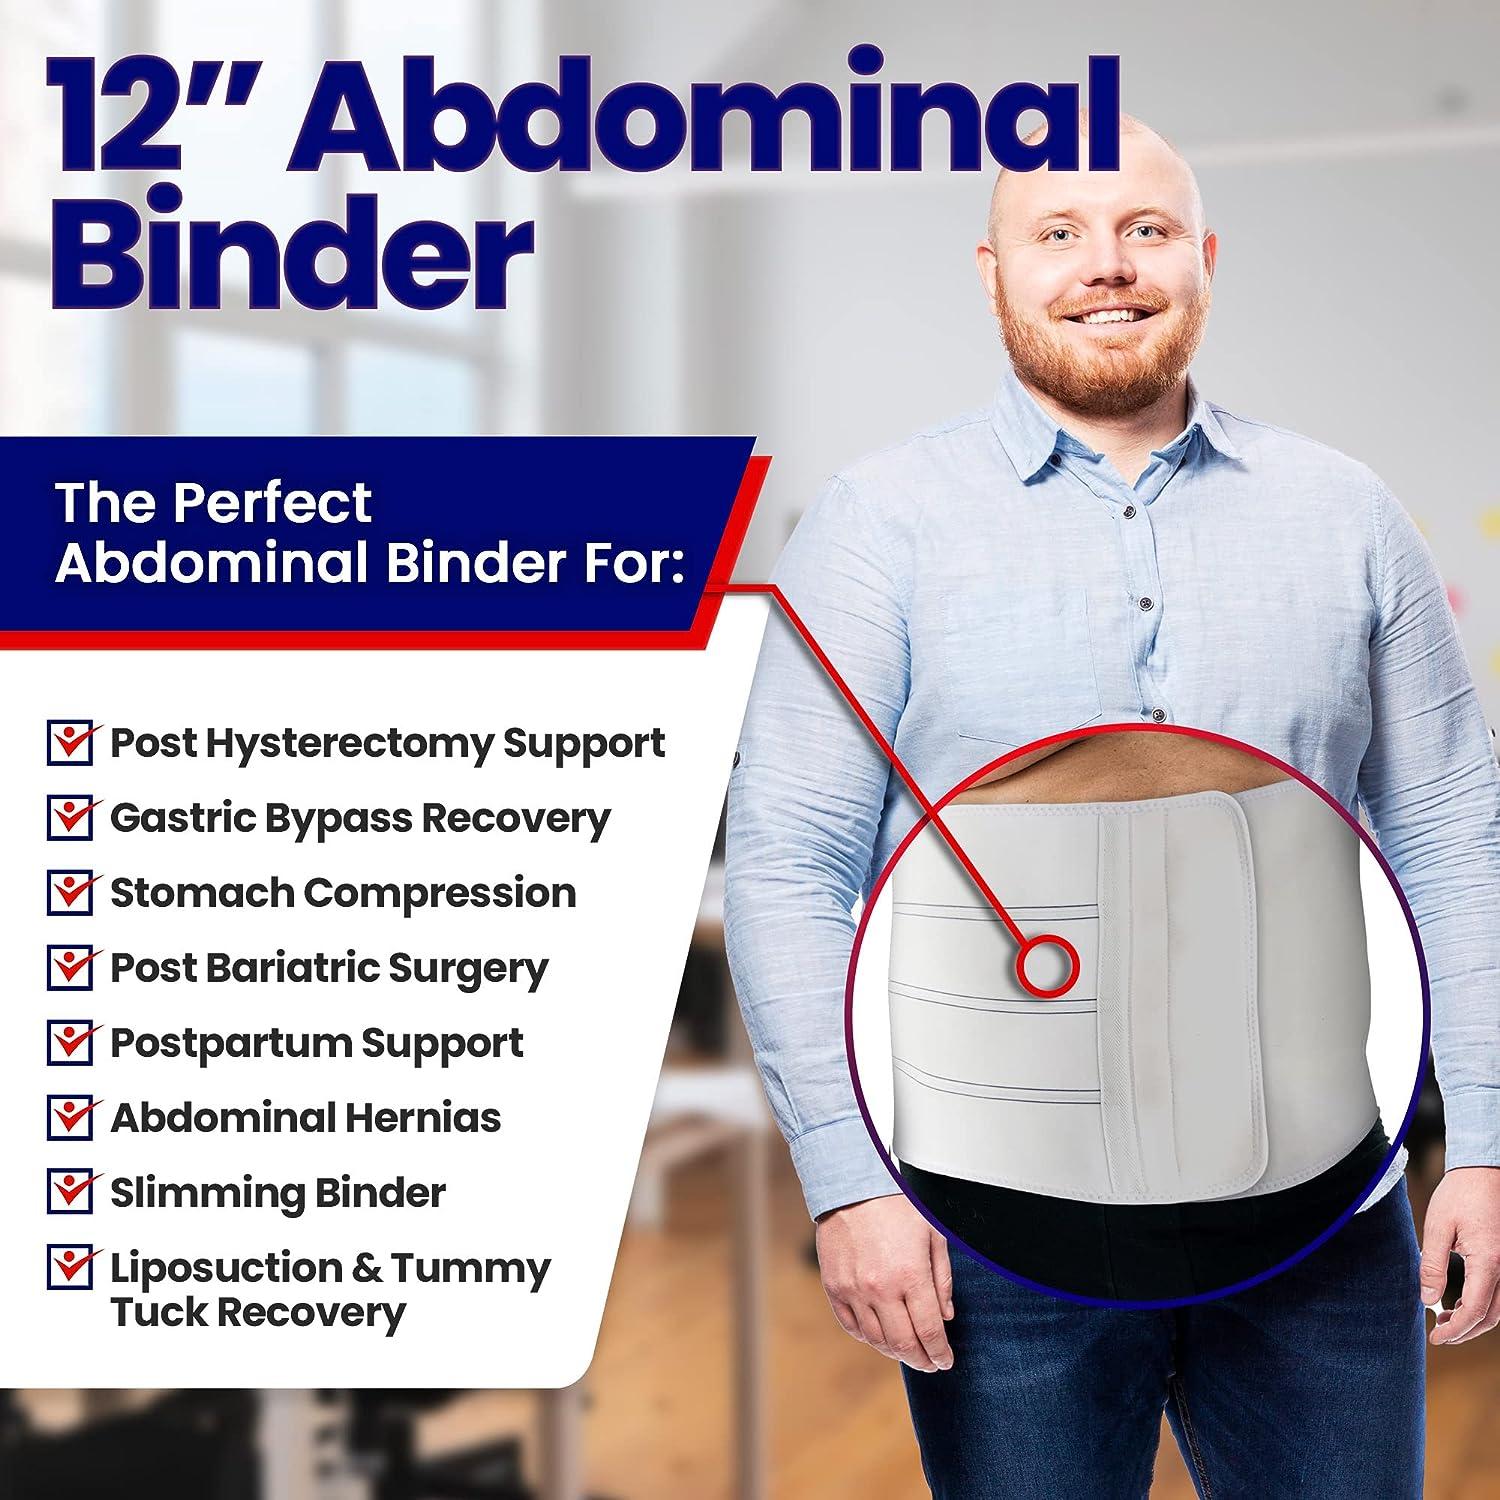 Abdominal Binder Post Surgery for Women or Men - 12 Wide Stomach Support  Belly Binder Postpartum Wrap for C Section Pregnancy Compression, Tummy Tuck  Belly Band, Plus Size Umbilical Hernia Belt (M)